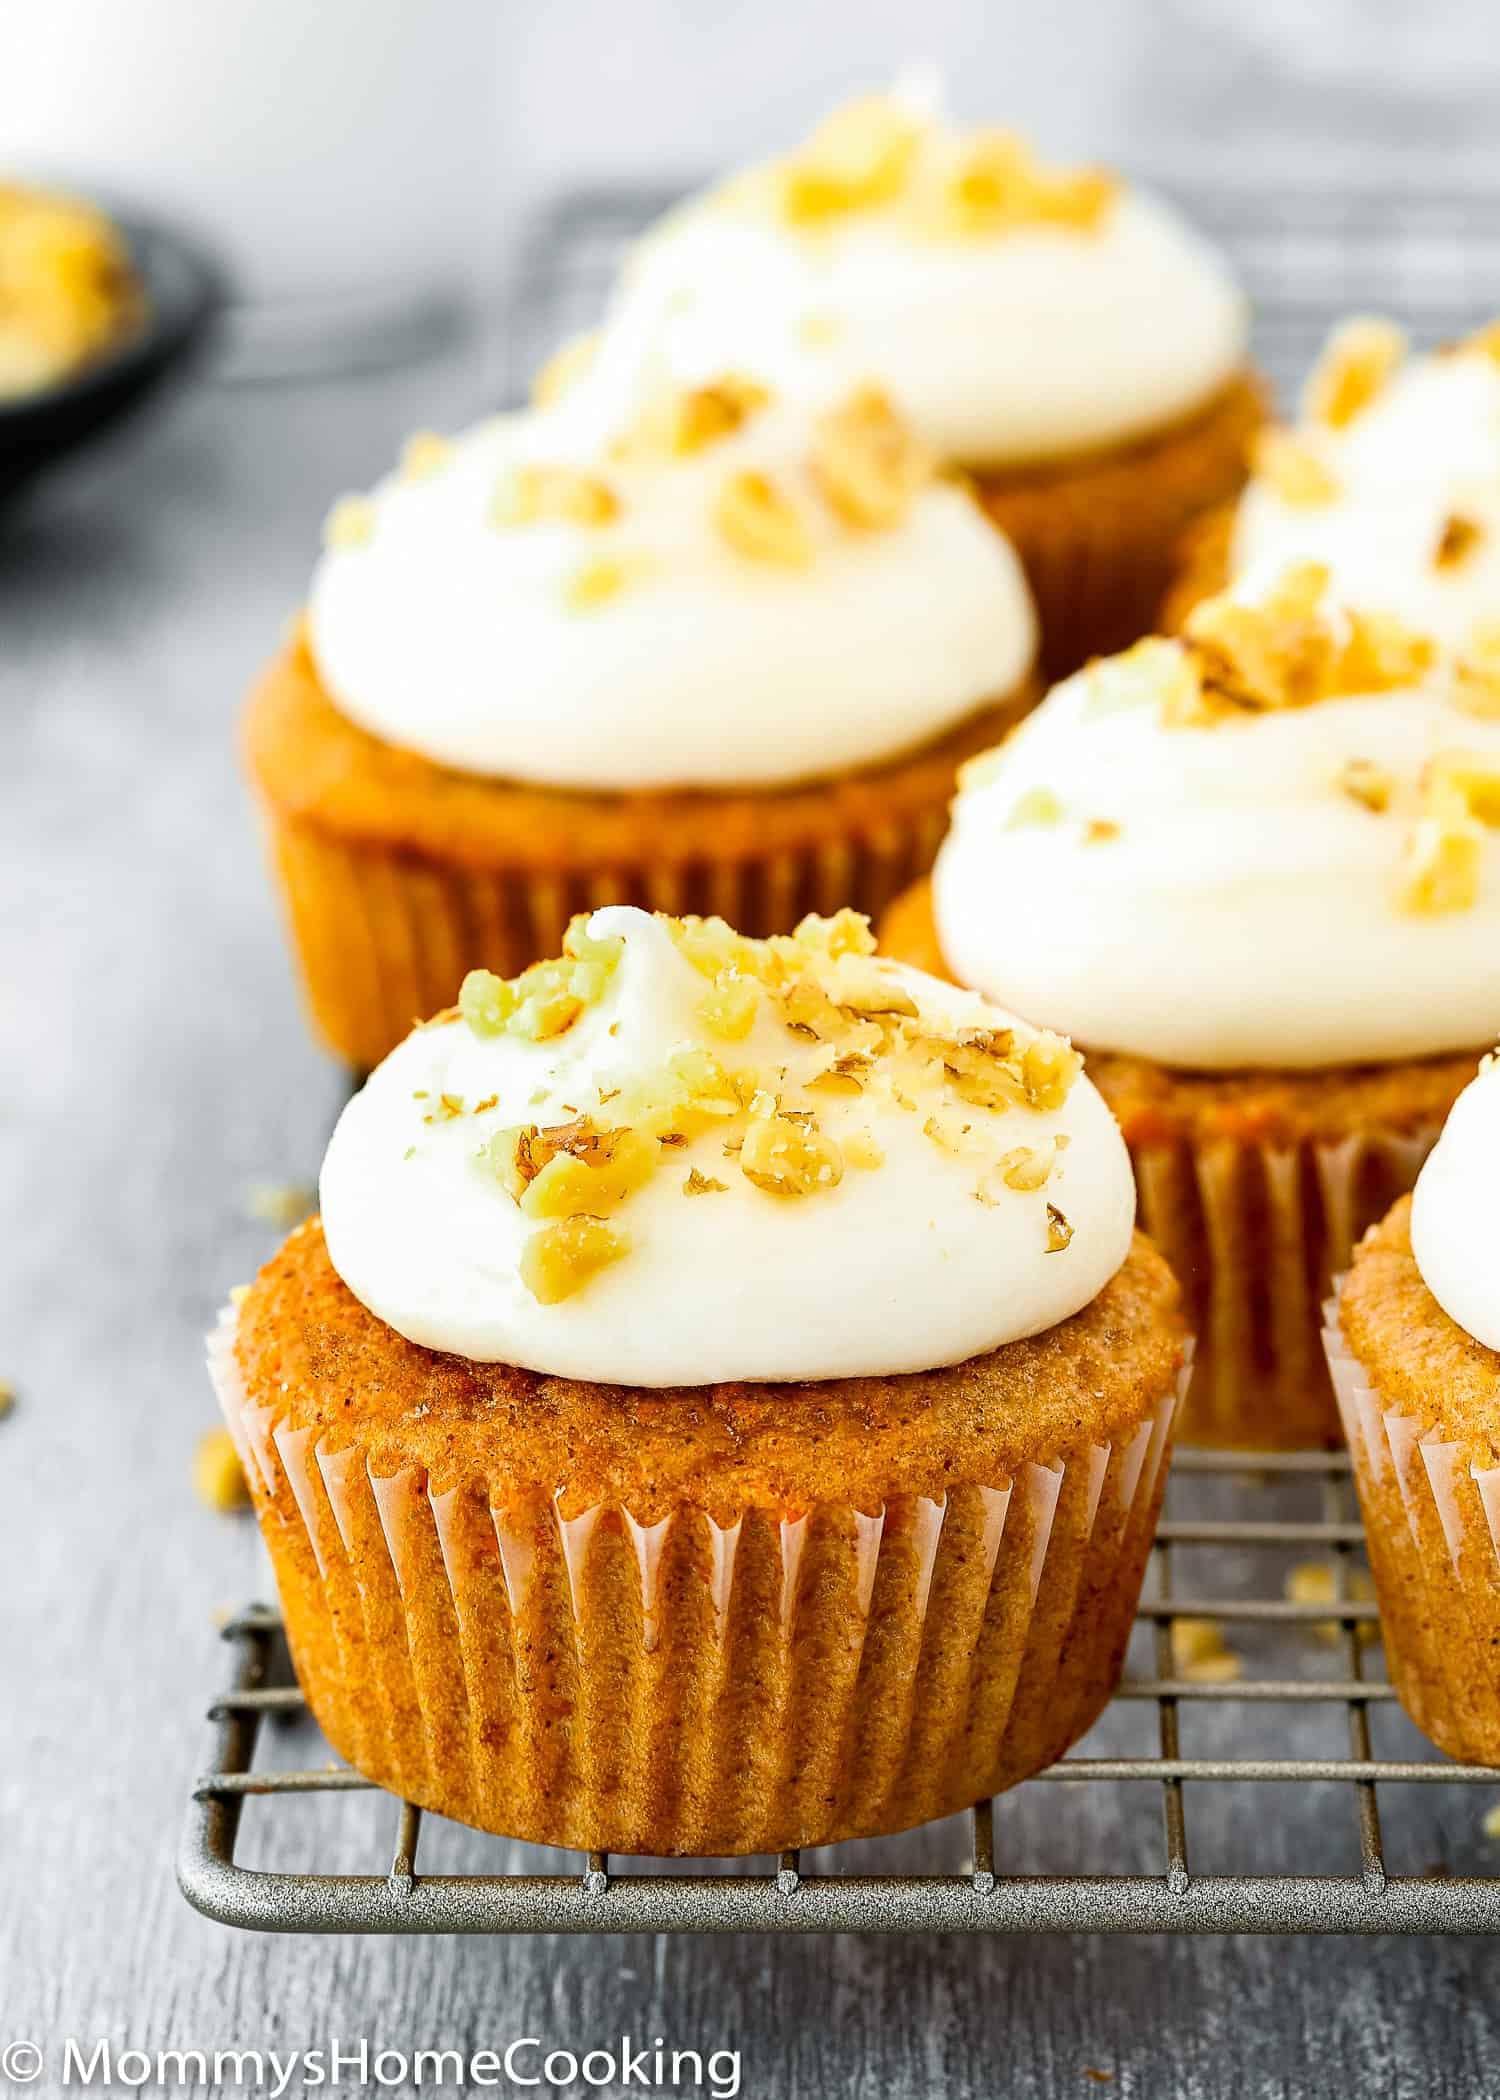 Eggless Carrot Cake Cupcakes with cream cheese frosting.